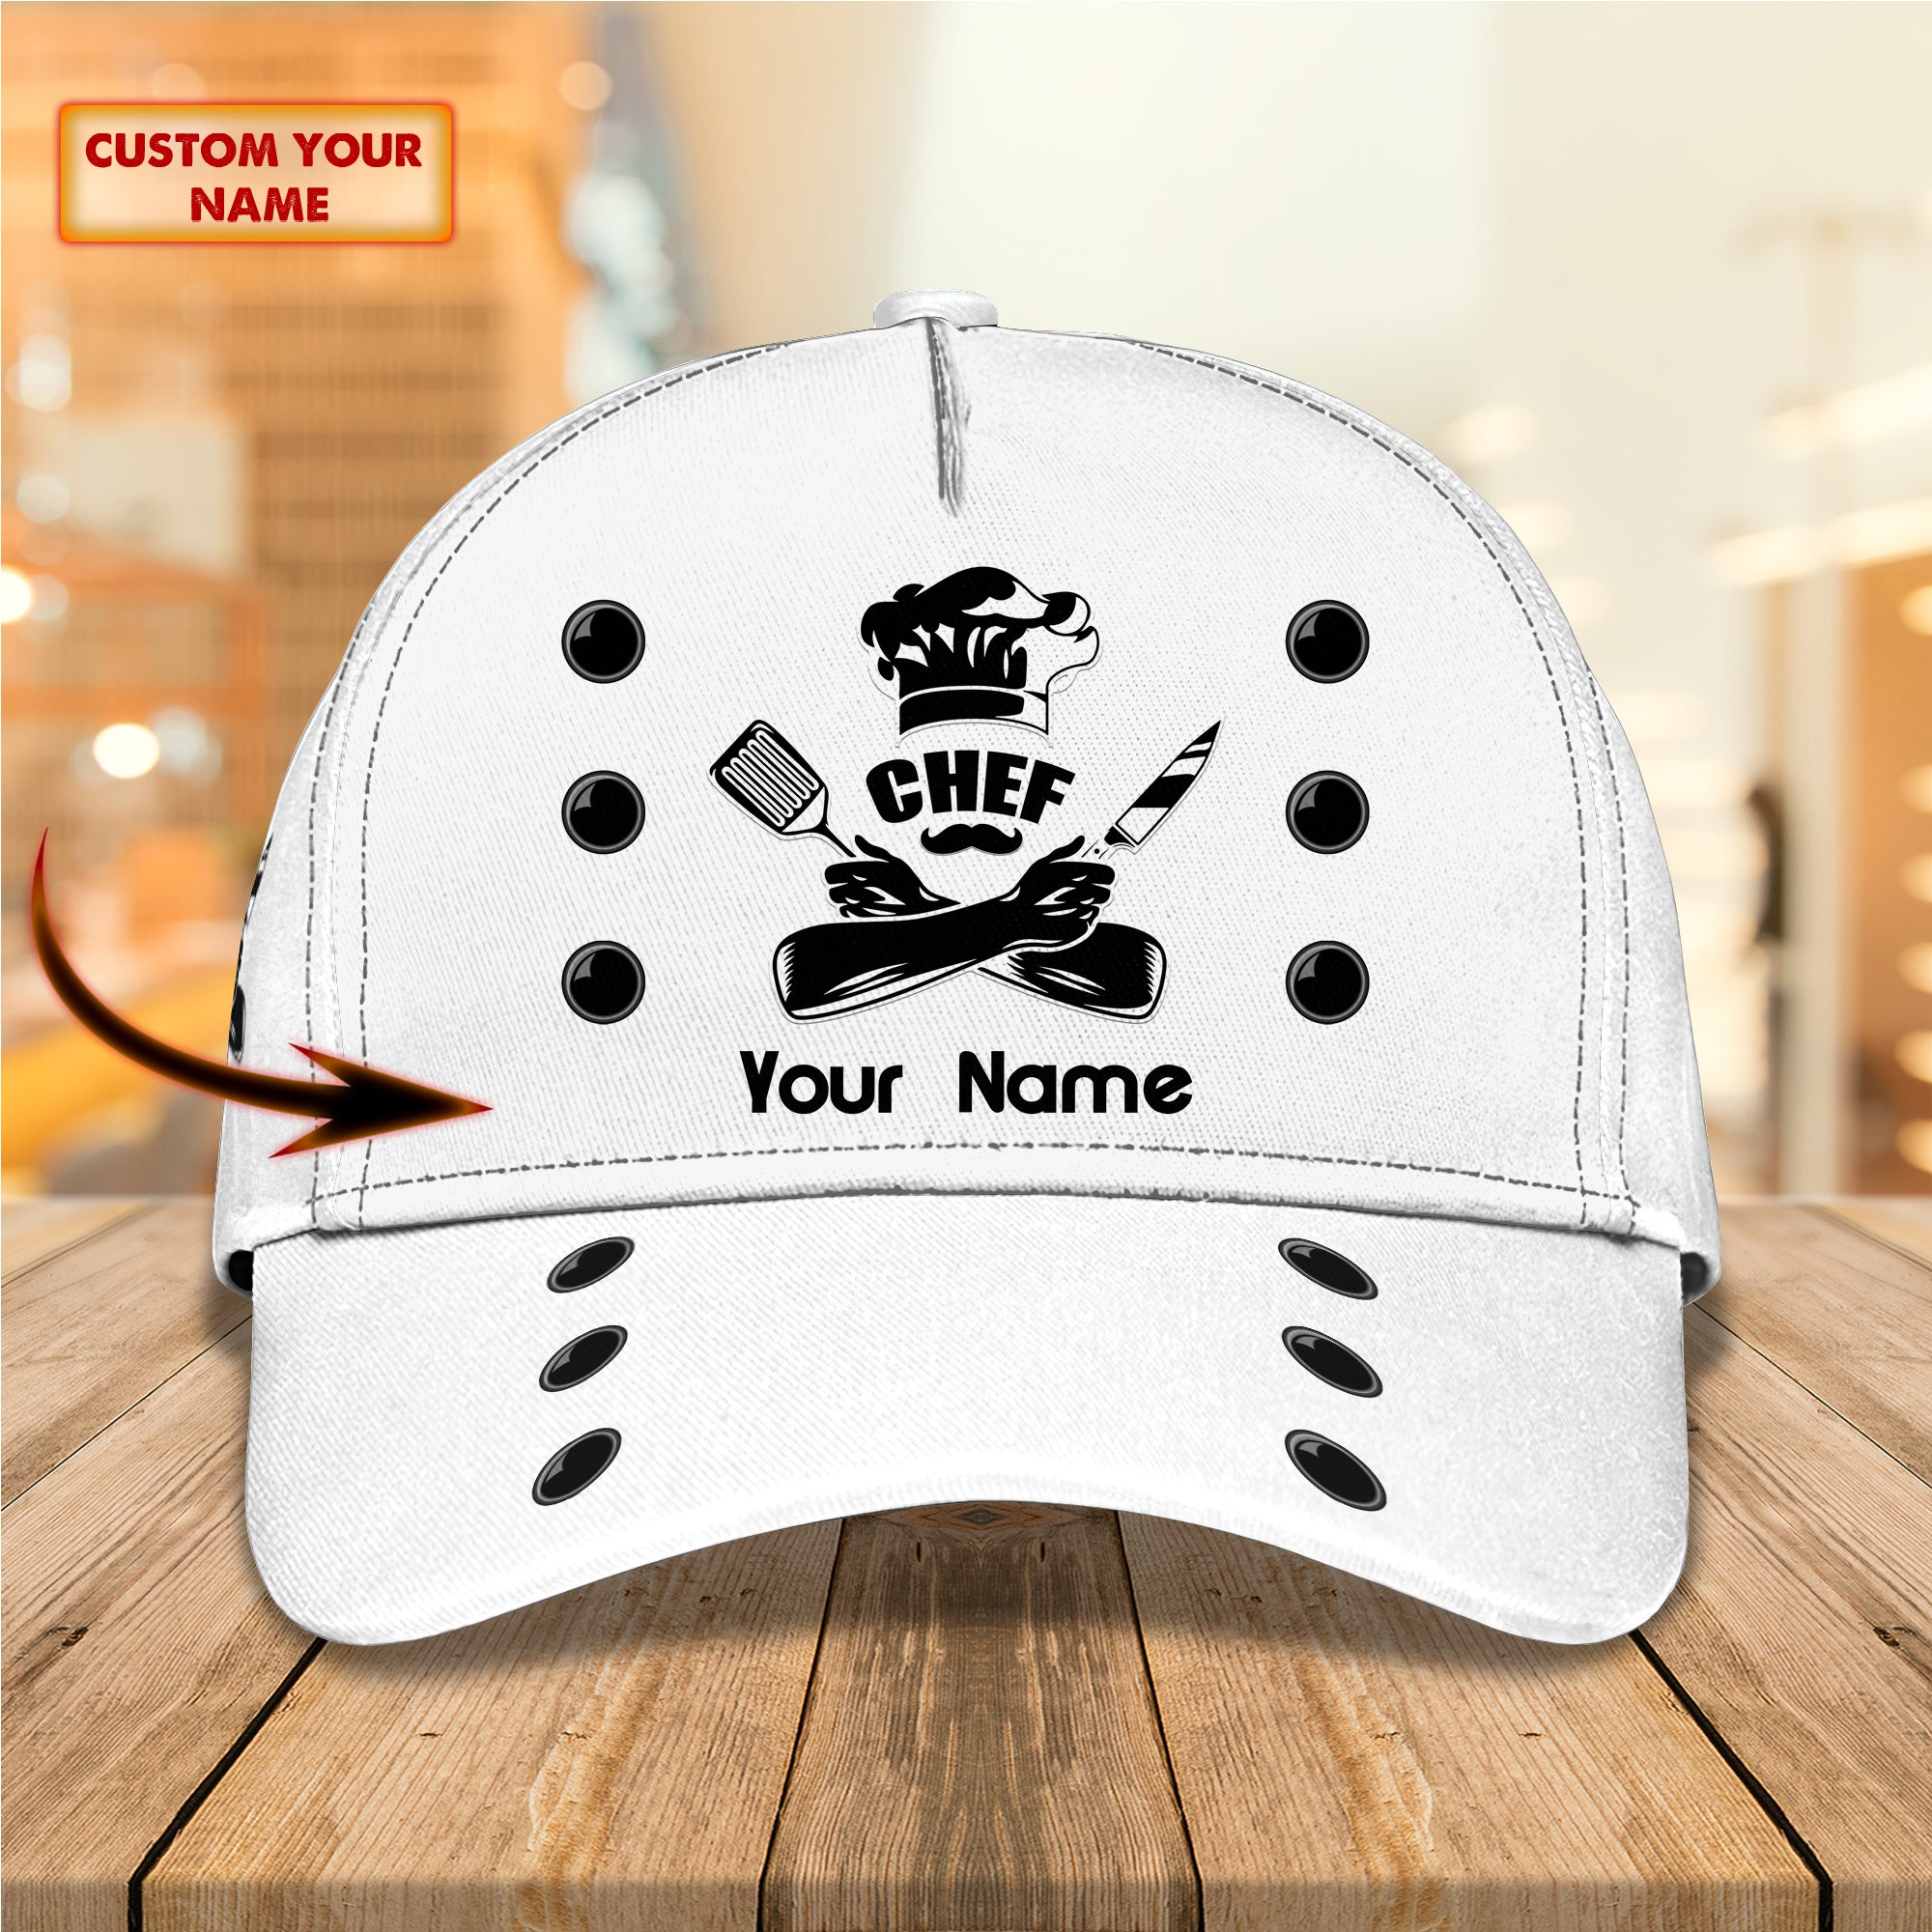 Chef - Personalized Name Cap 53 - Bhn97